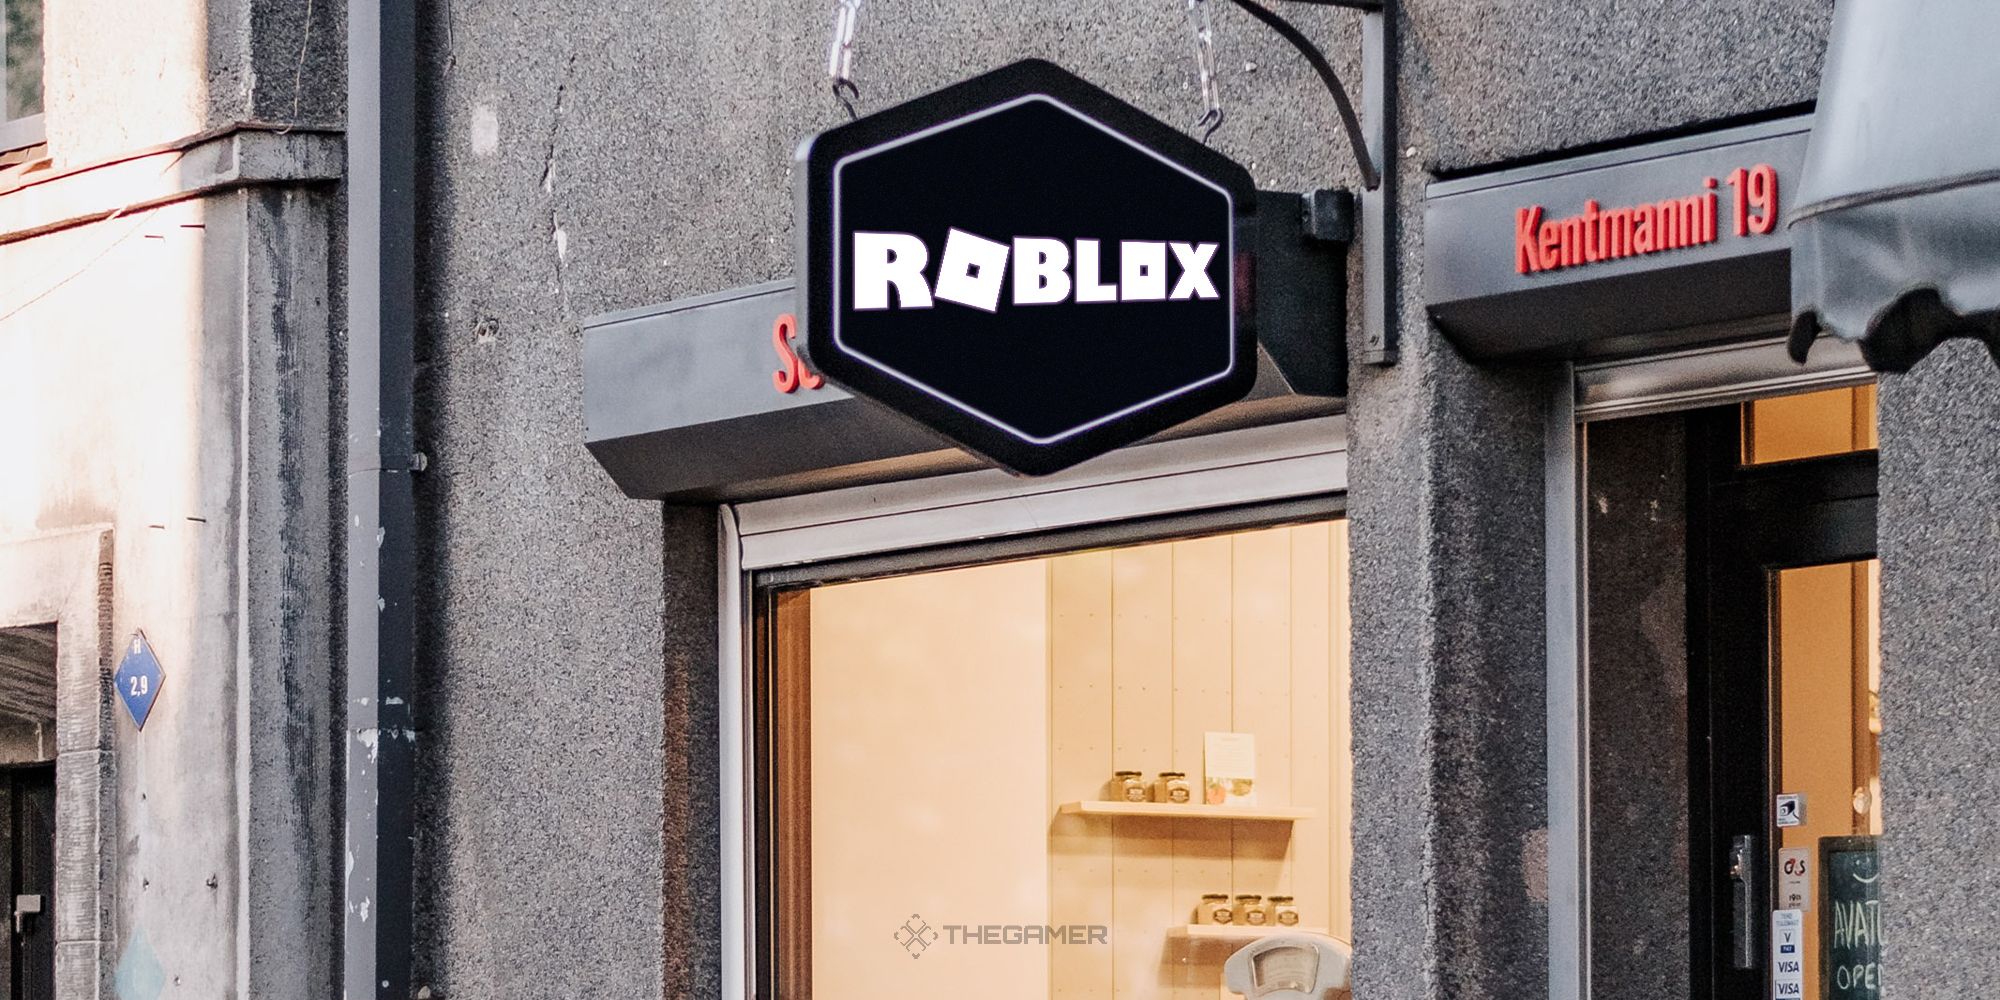 Report: how Roblox CEO David Baszucki avoided capital gains taxes by giving  shares to his relatives